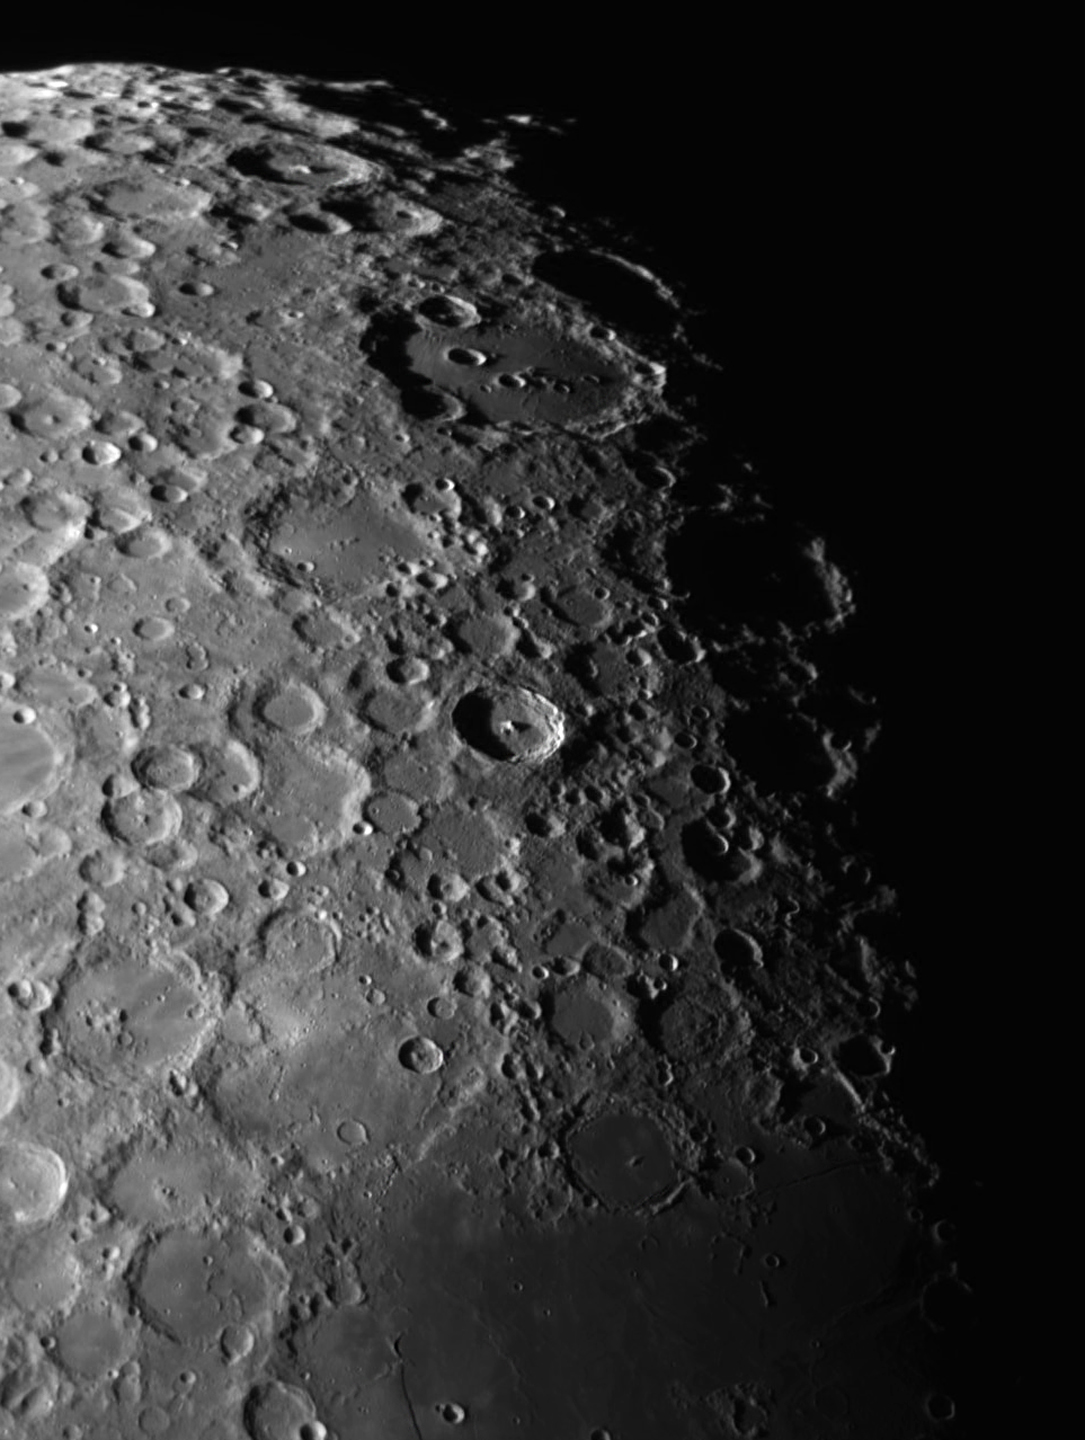 Clavius 22 Jan 2021.Celestron C8. f10. 1520  frames. This and the next 3 images are of the moon at 9.6 days by Ken Kennedy